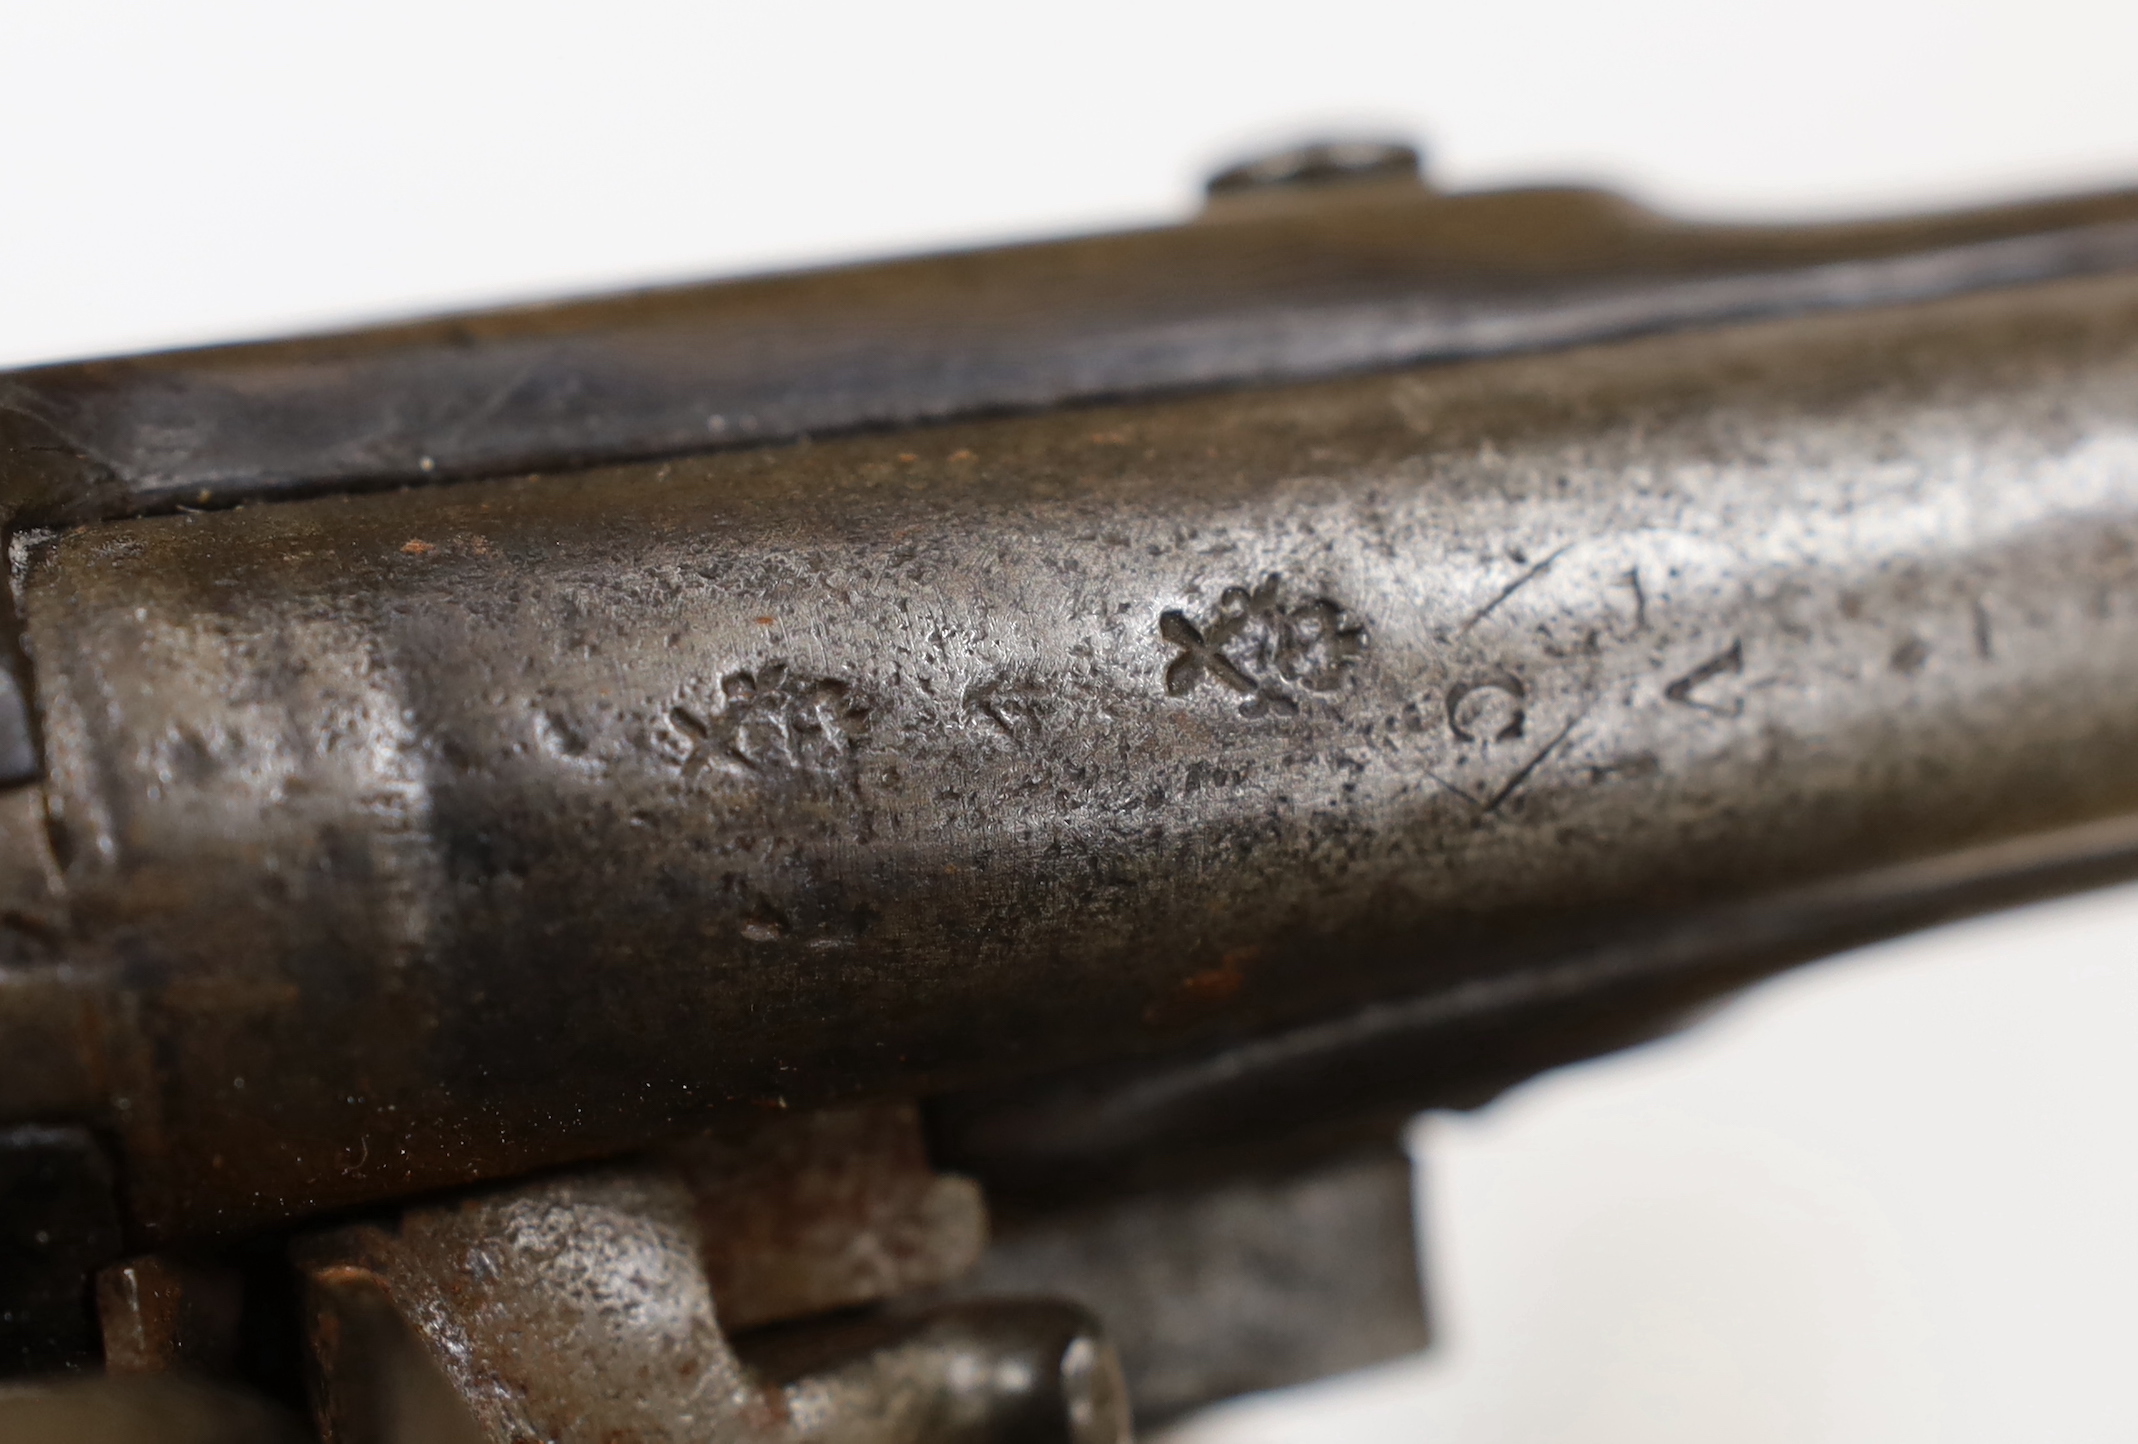 A 16 bore in East India company, Flintlock holster, pistol, barrel, engrave with EIC heart mark - Image 5 of 5